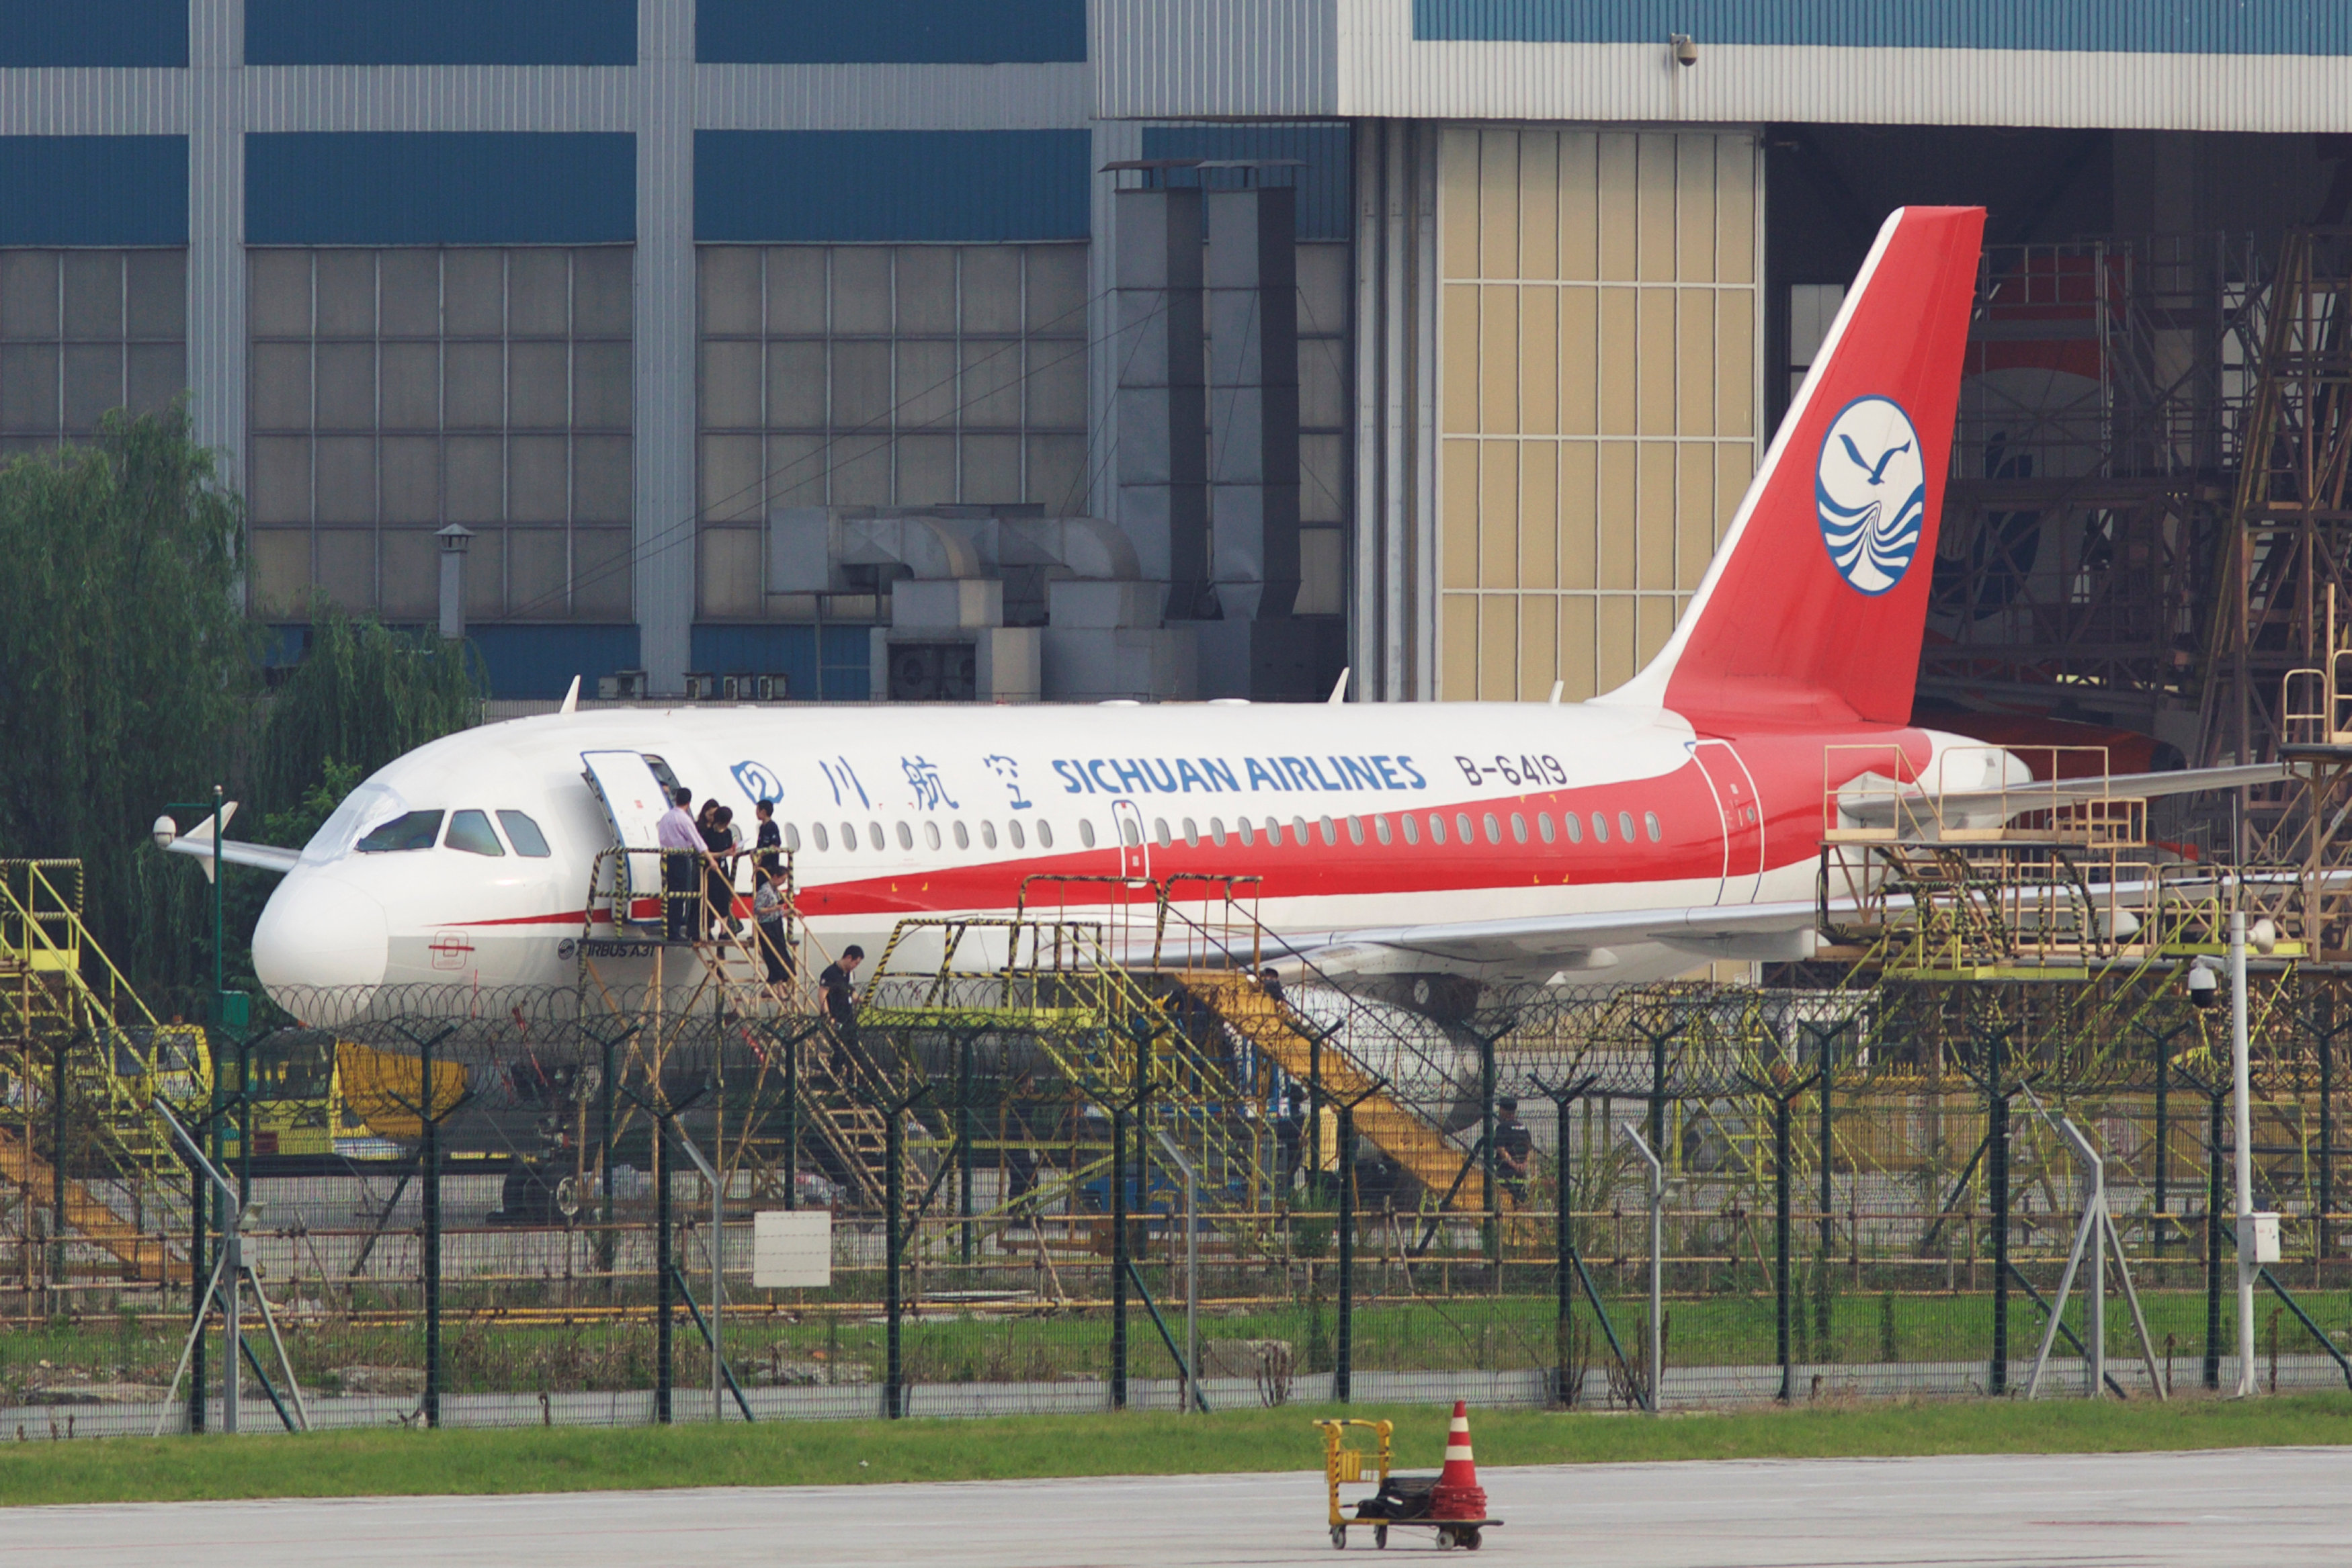 Sichuan Airlines co-pilot 'sucked halfway' out of cockpit, says captain